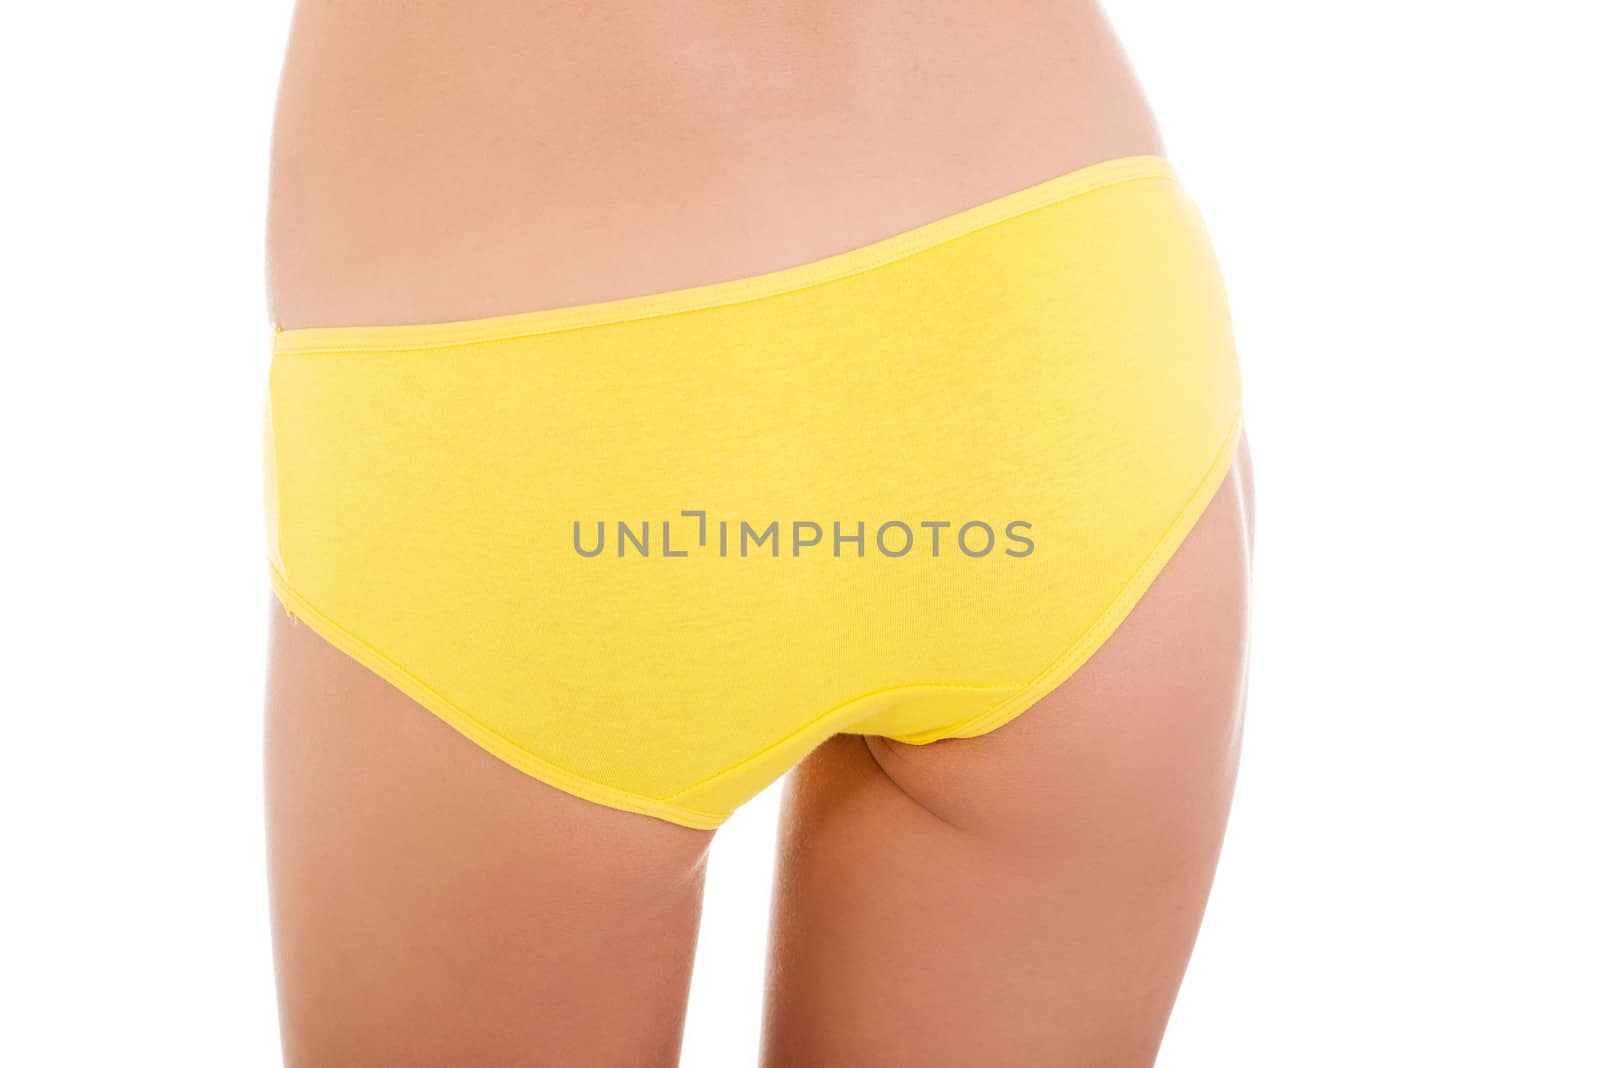 Slim tanned woman's body in yellow panties. Isolated over white background.